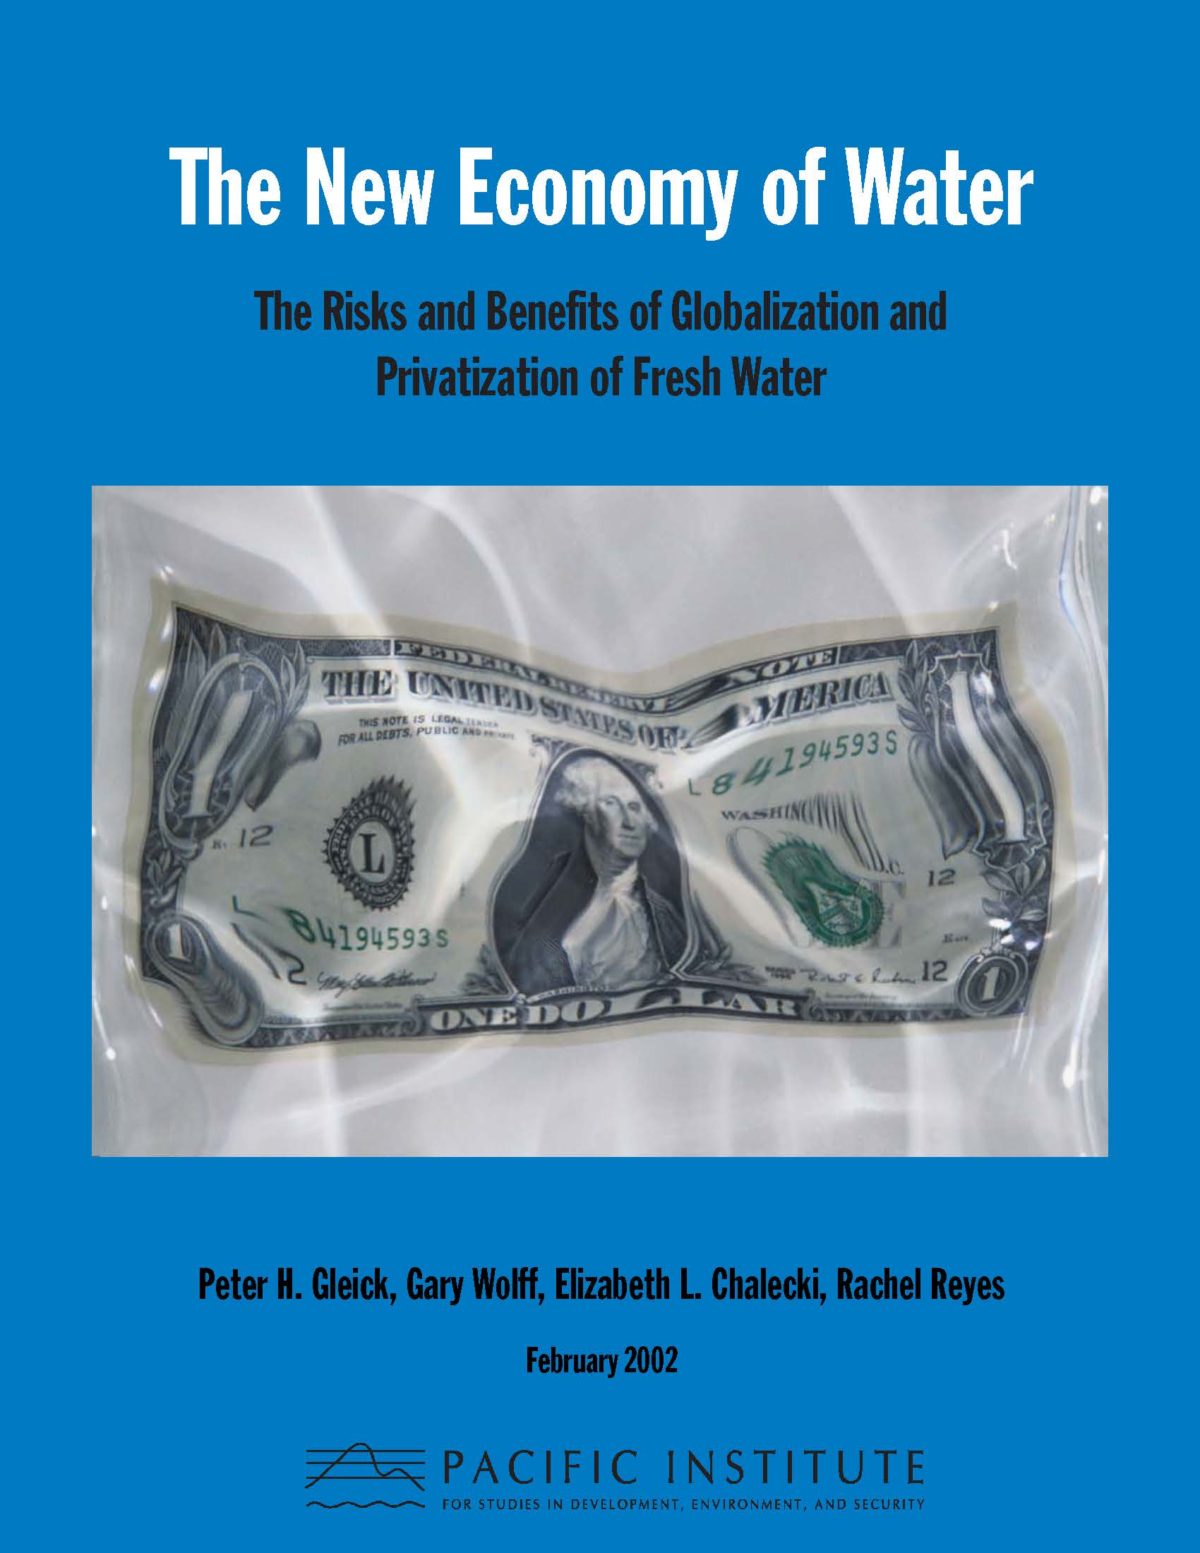 The New Economy of Water: The Risks and Benefits of Globalization and Privatization of Fresh Water